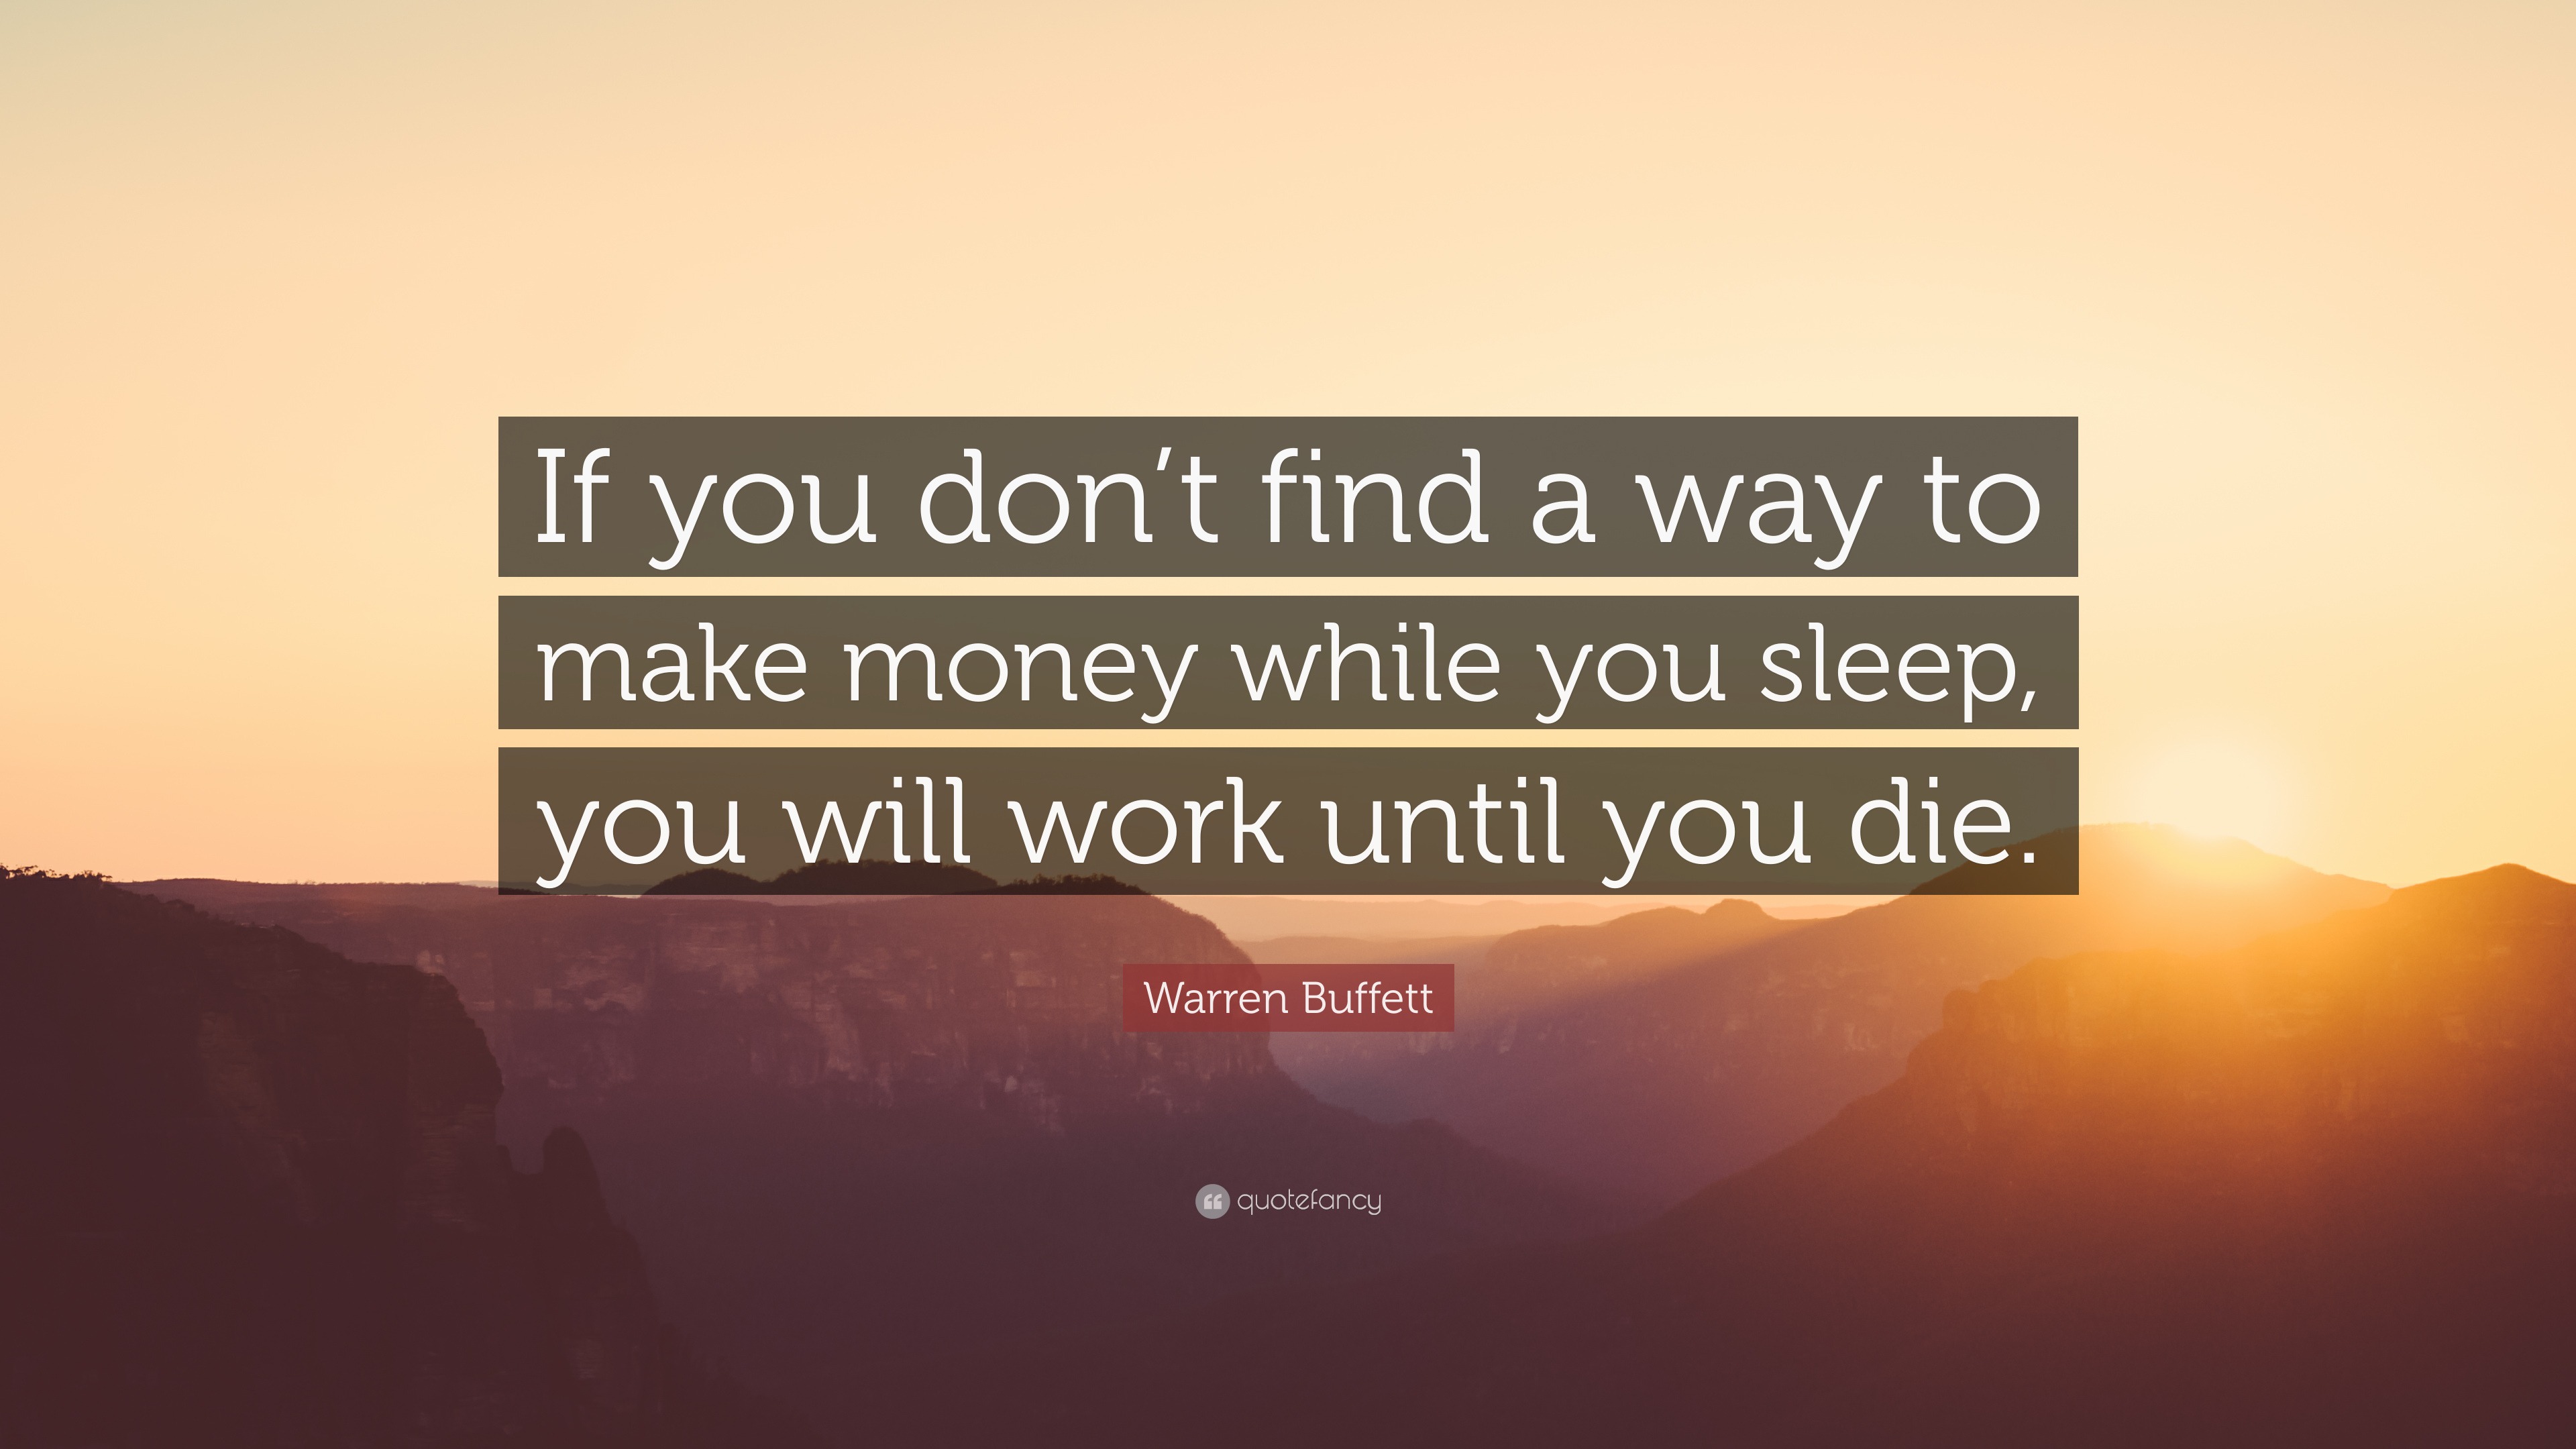 Warren Buffett Quote If You Don T Find A Way To Make Money While - warren buffett quote if you don t find a way to make money